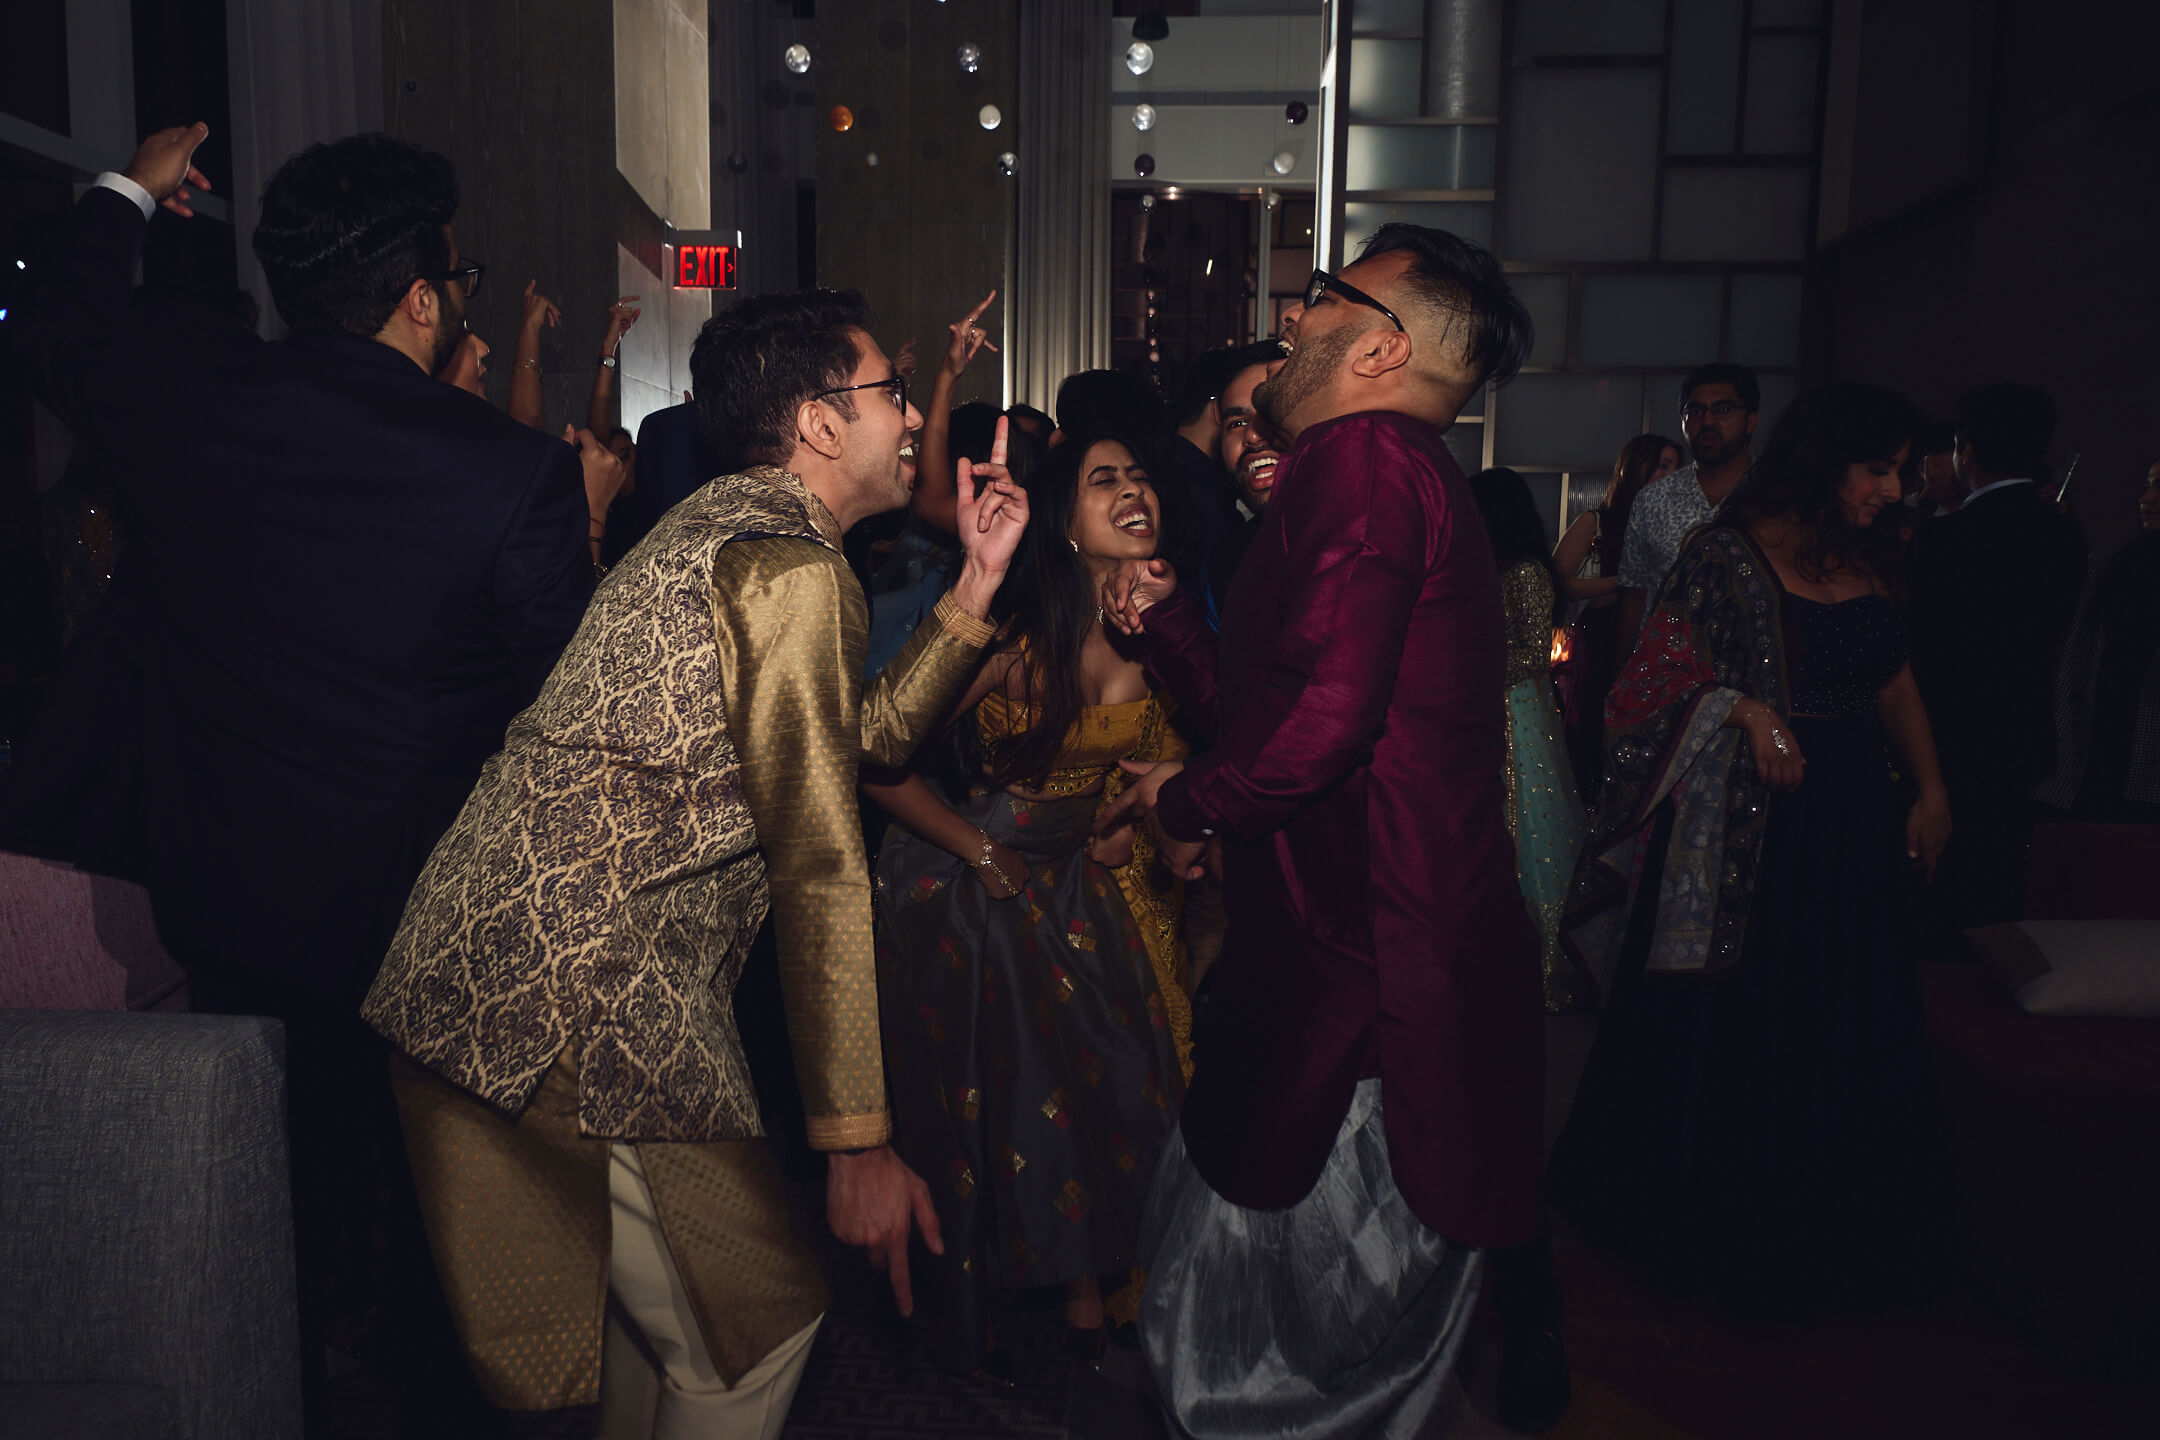 Sehal & Pranay - Diwali Celebration - Event Photography - Lifestyle Photography - Downtown Brooklyn, New York